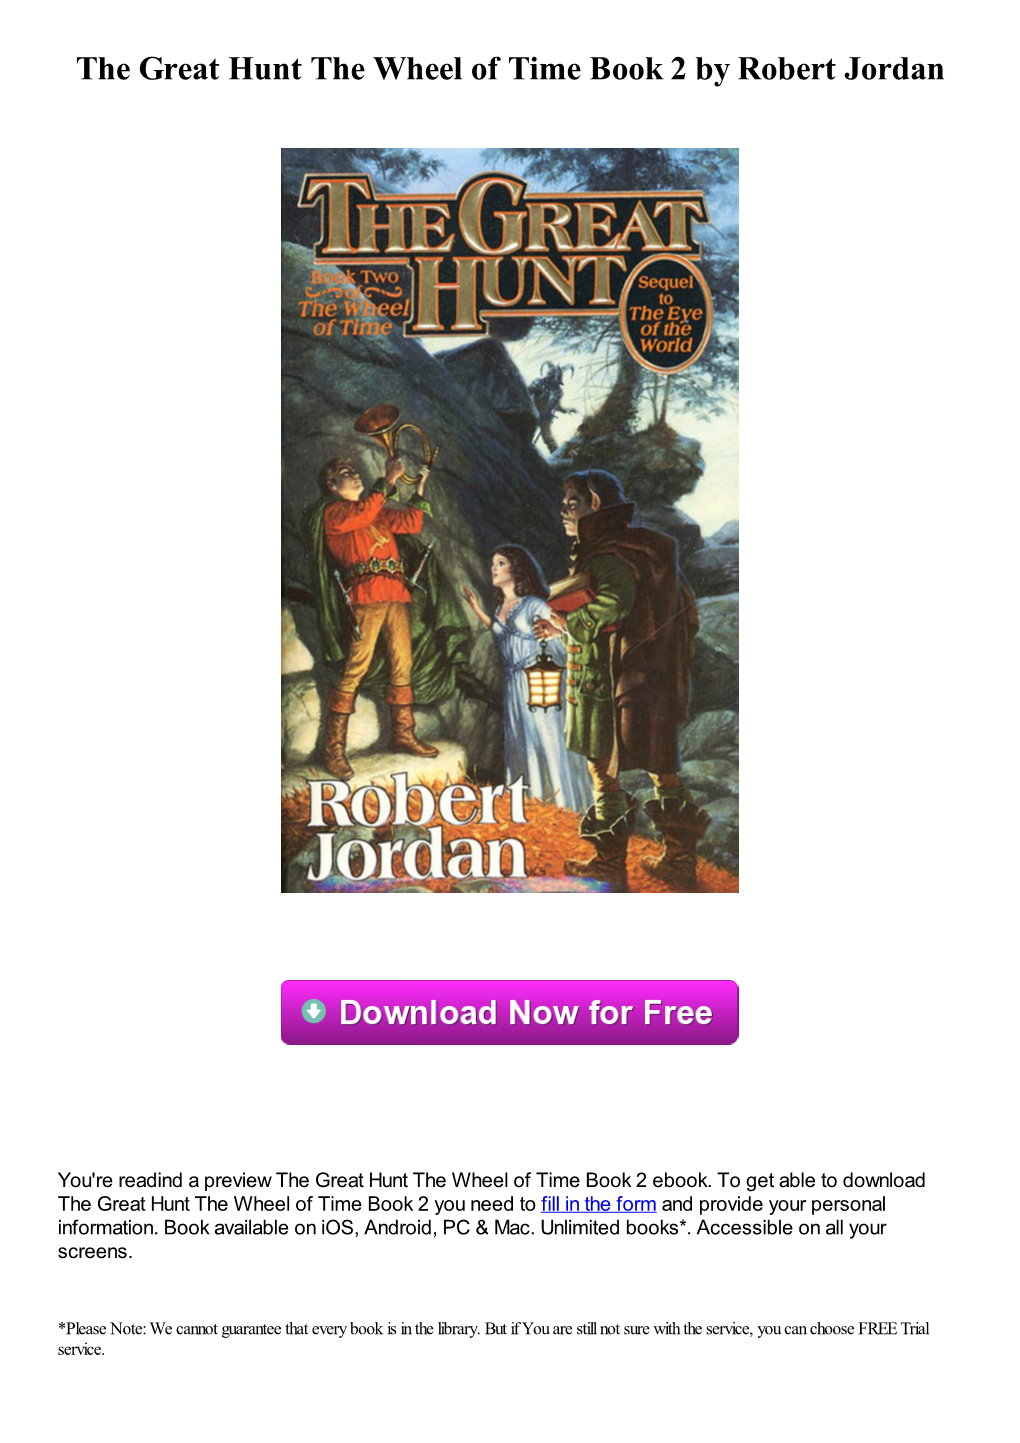 The Great Hunt the Wheel of Time Book 2 by Robert Jordan